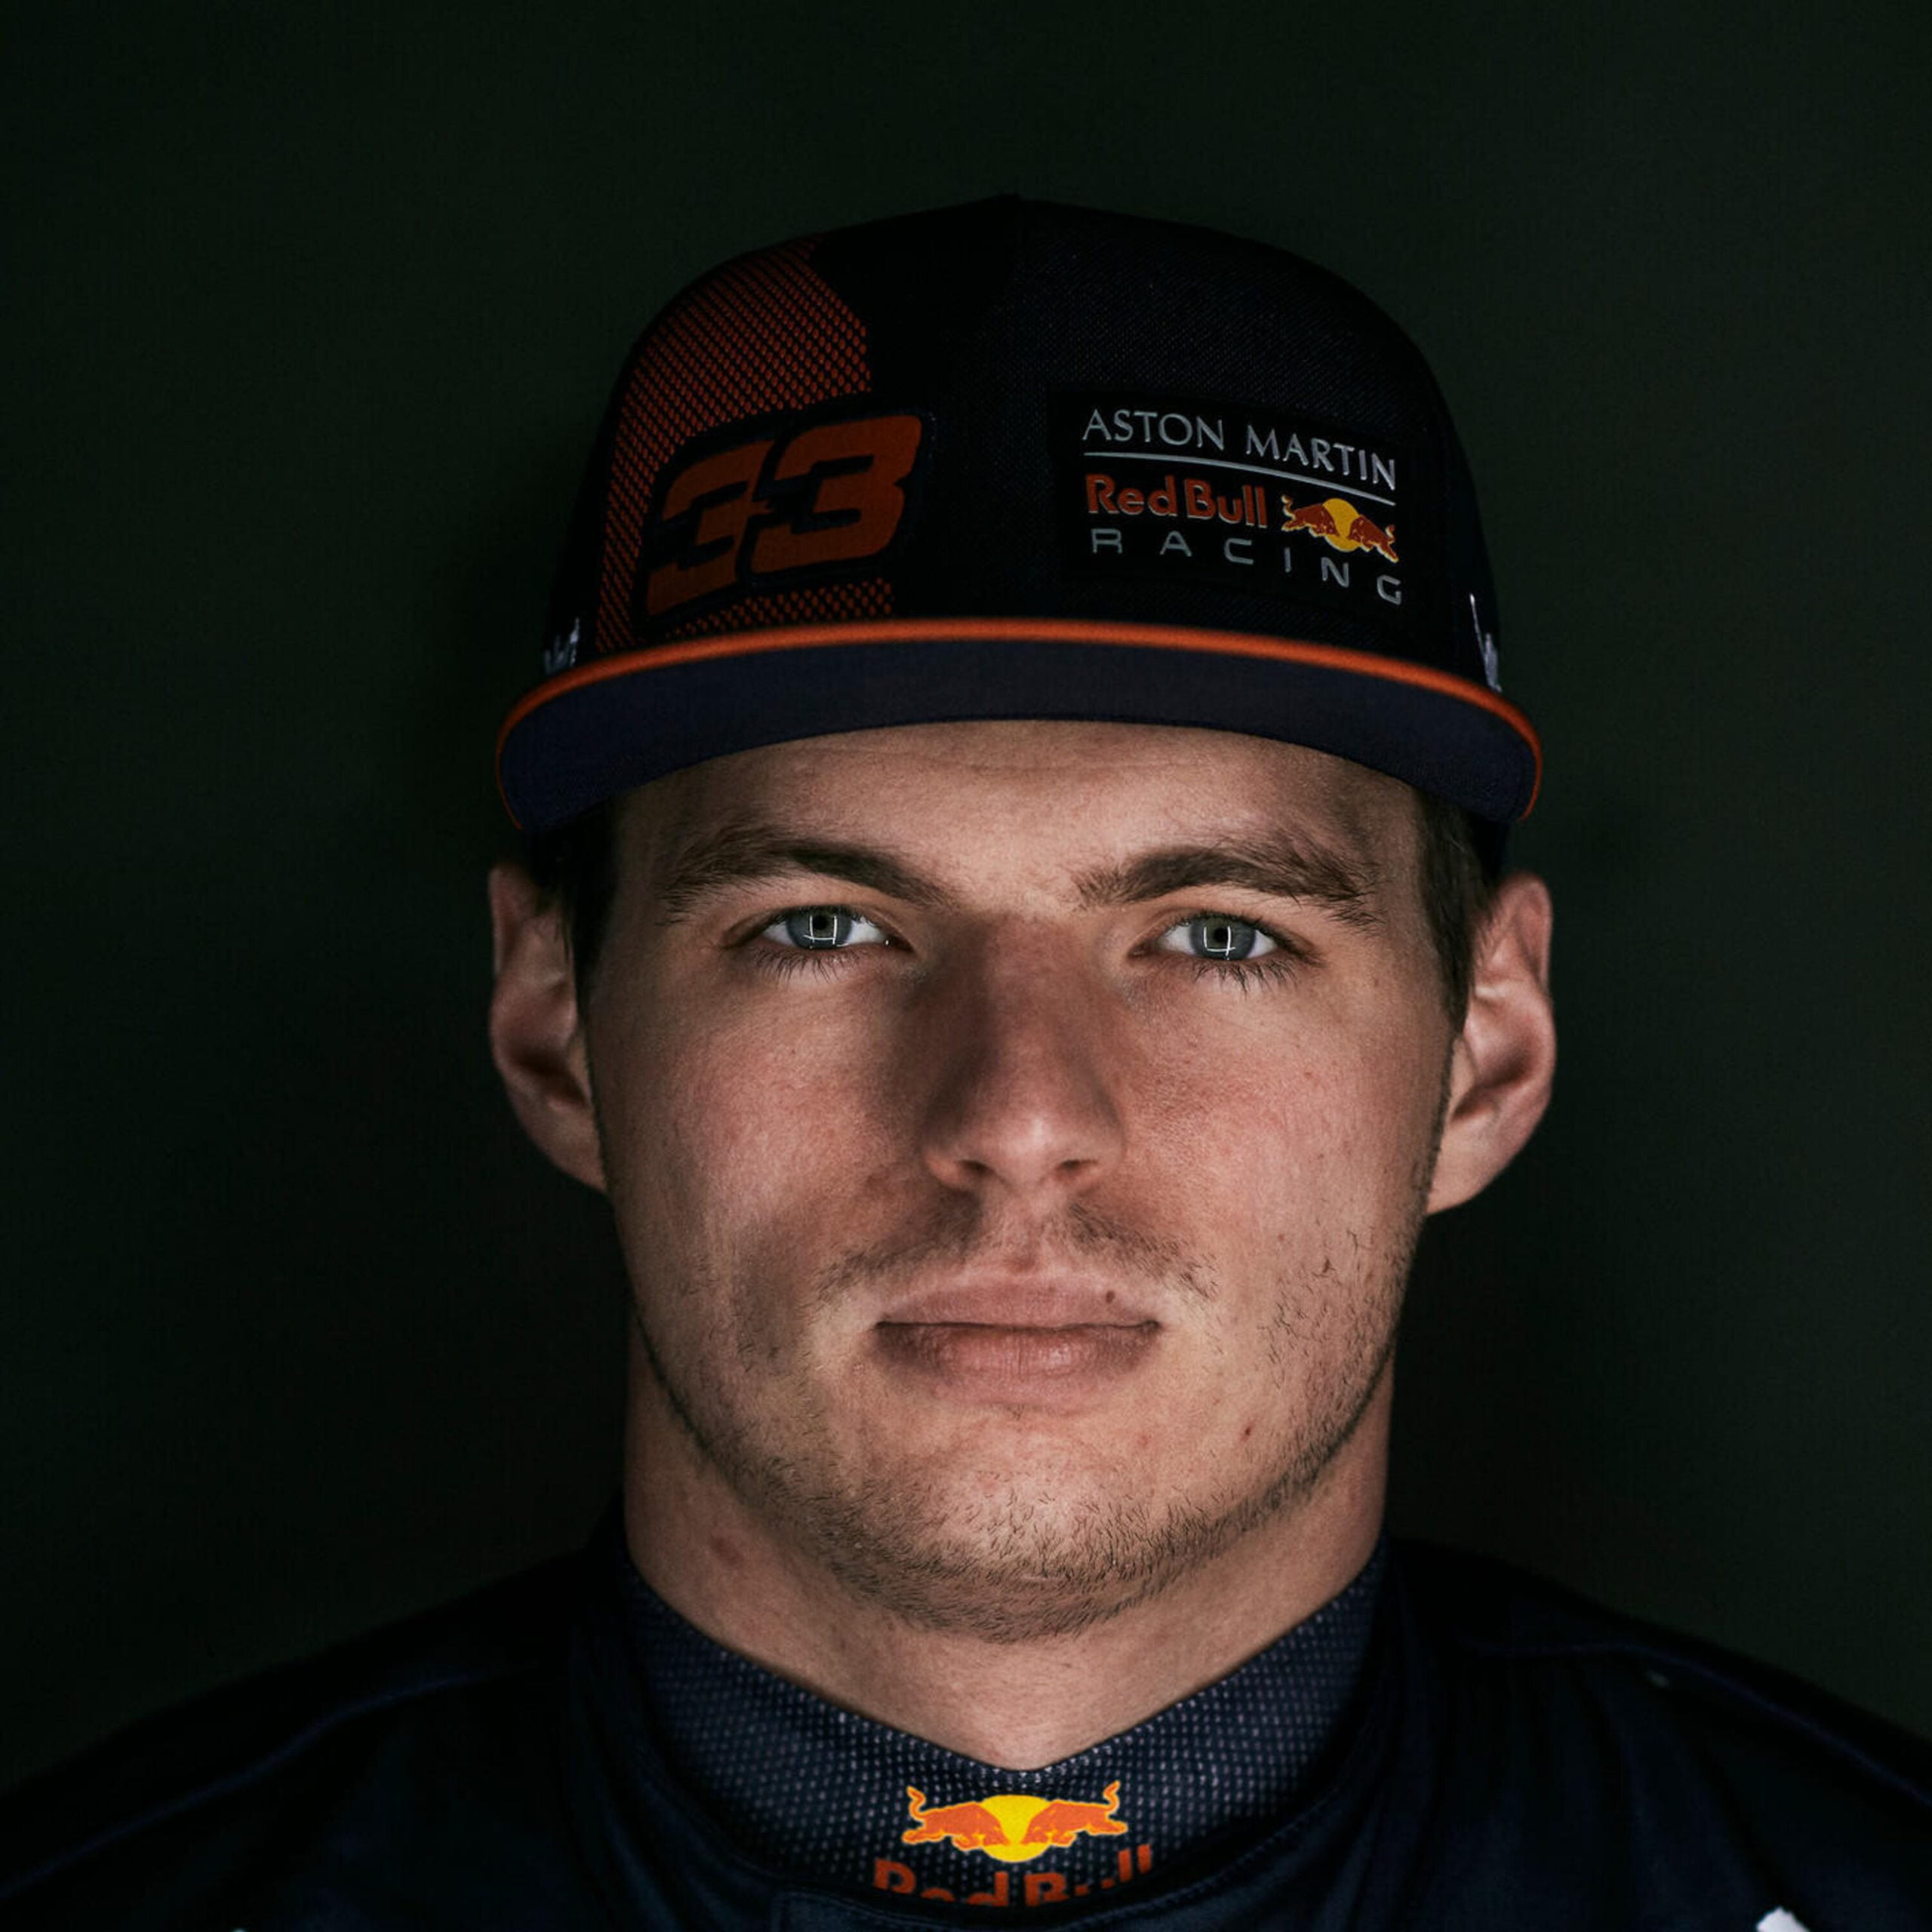 49: Max Verstappen Might Not Win F1 Title Before 2023